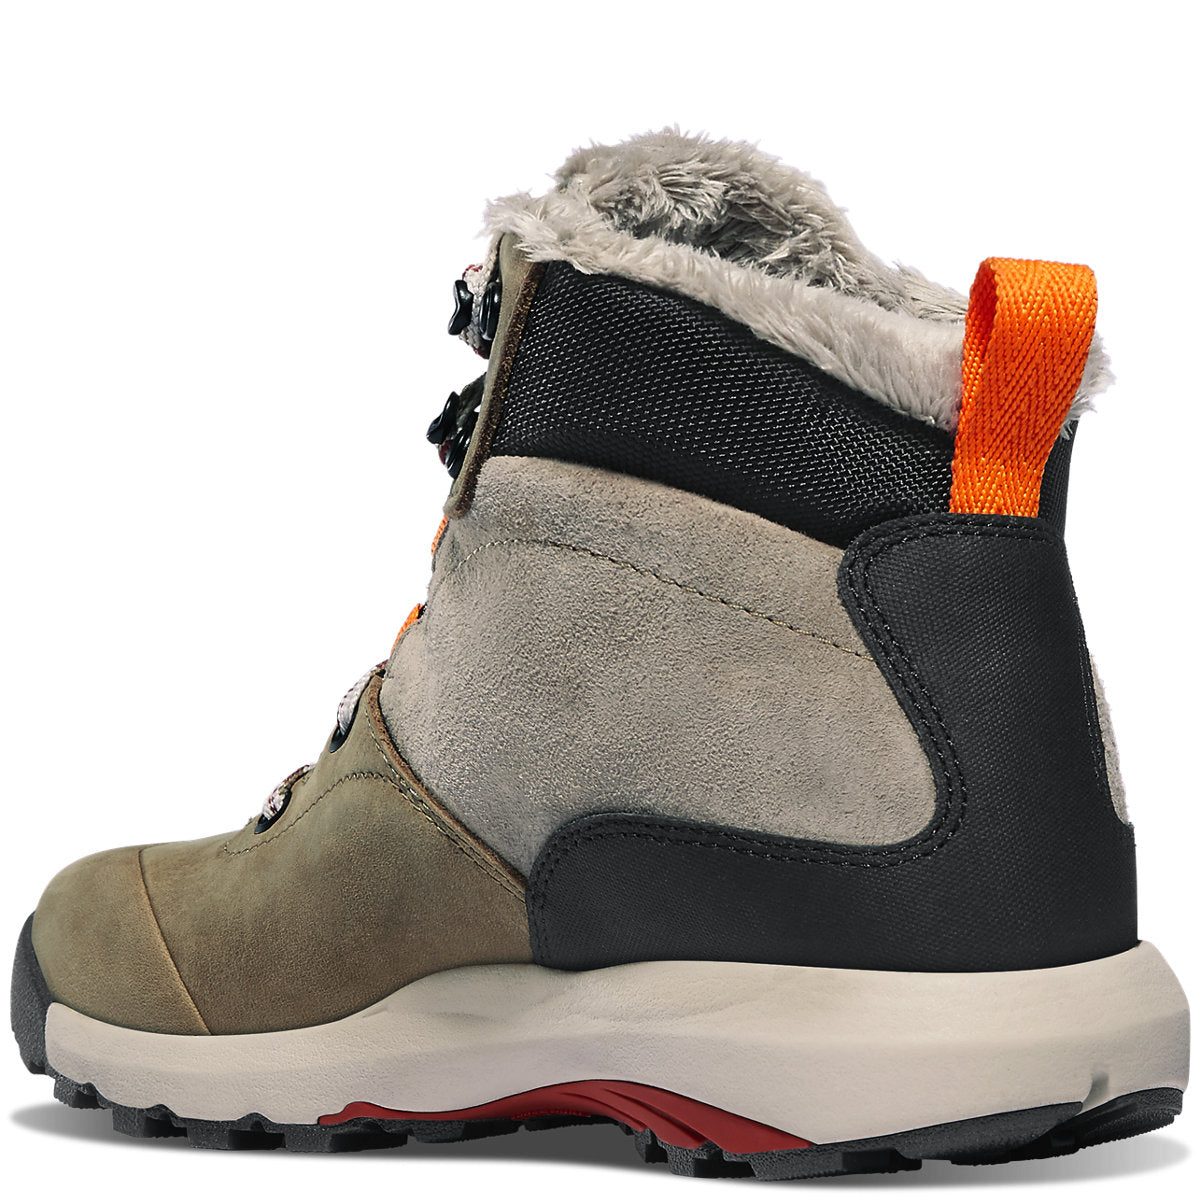 Danner Women's Inquired Mid Winter 5" Boots